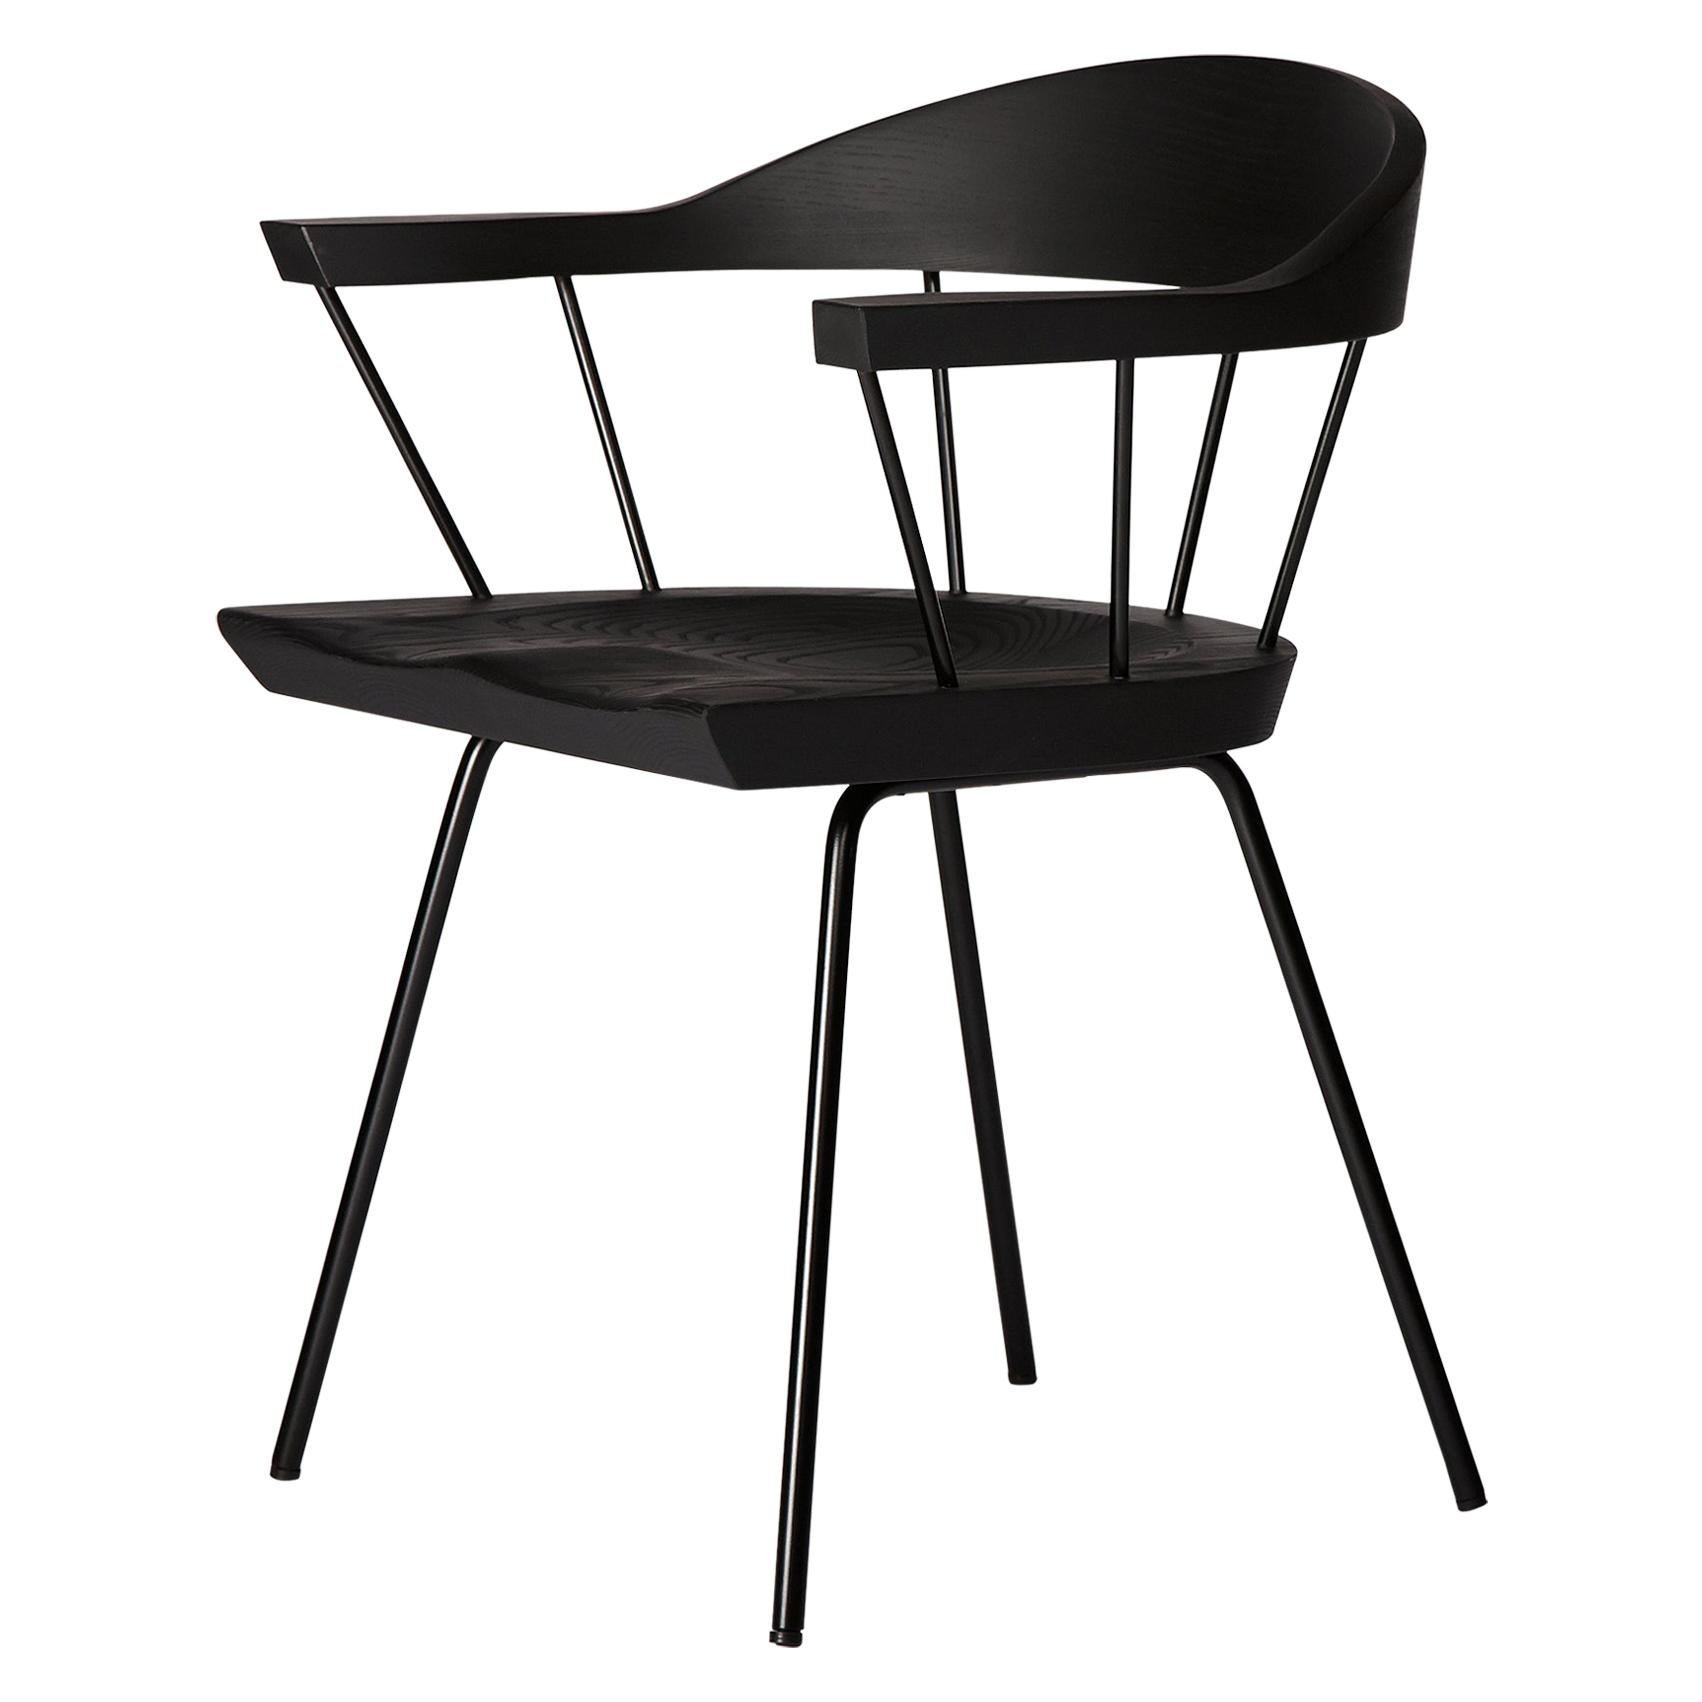 Spindle Chair in Solid, Carved Ebonized Ash and Steel Designed by Craig Bassam